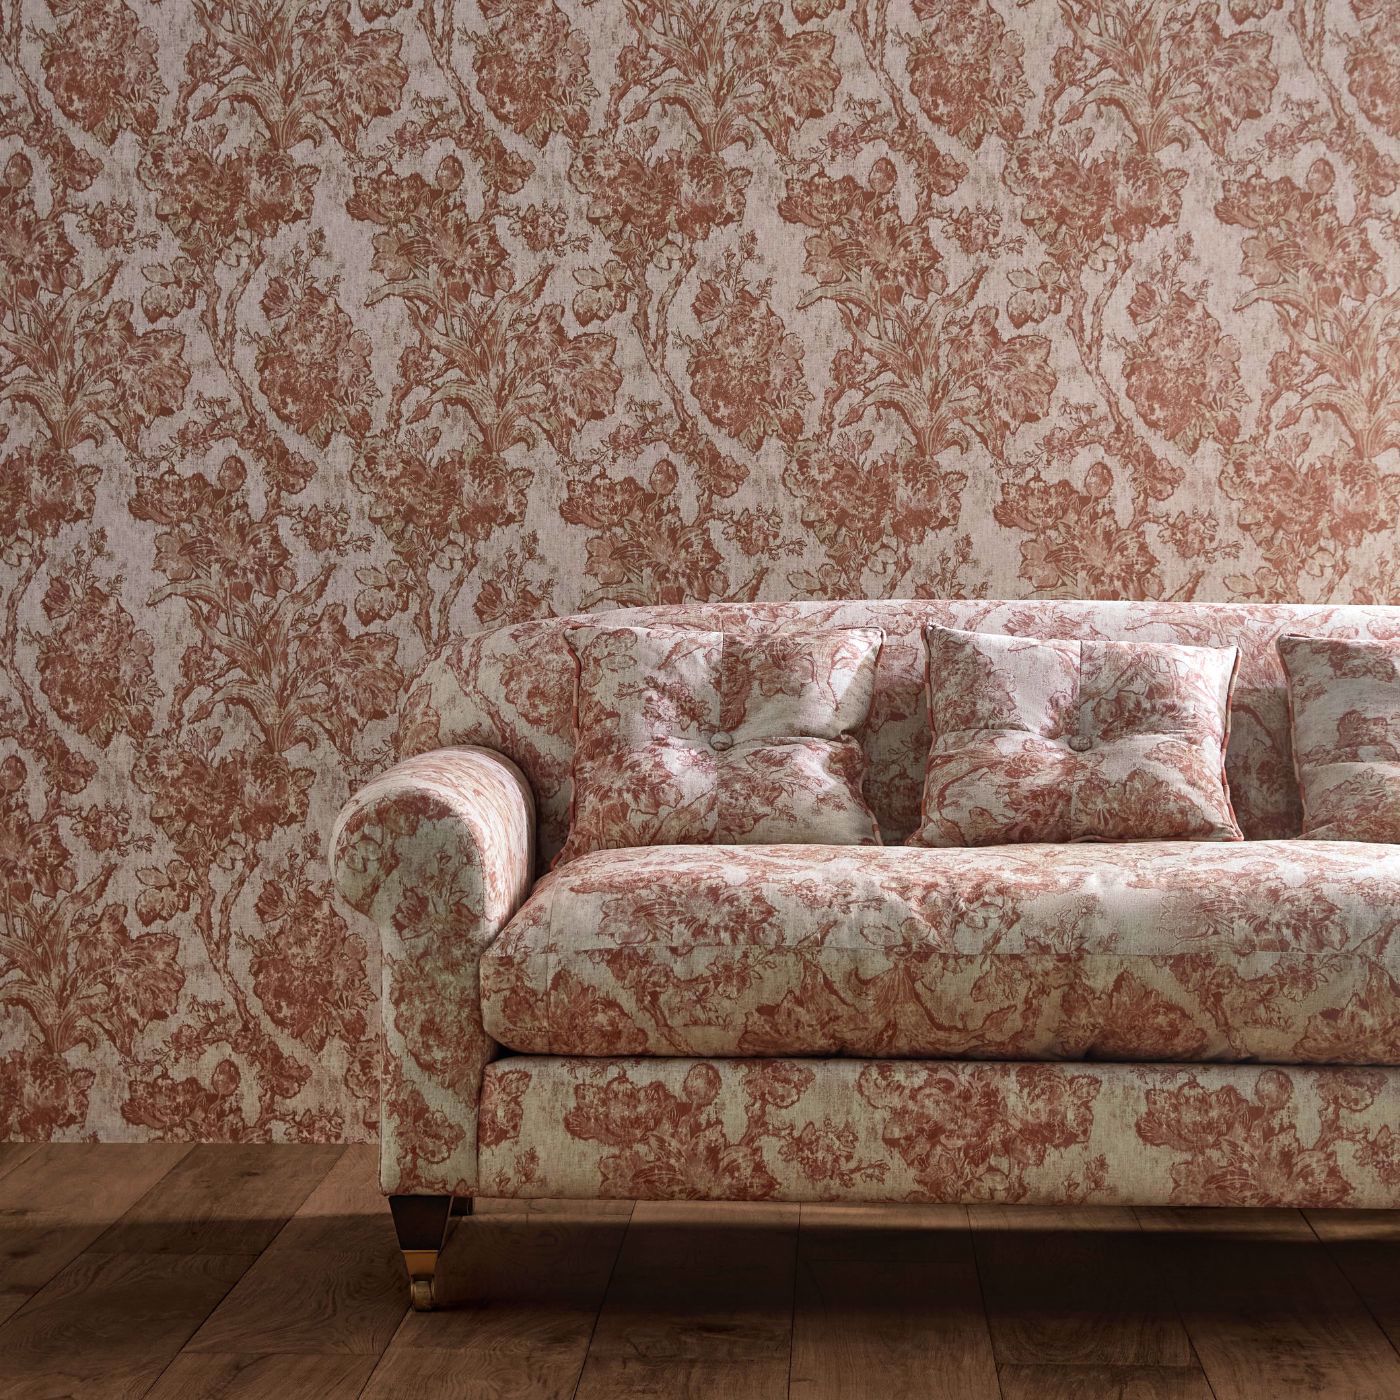 Fringed Tulip Toile Putty Wallpaper - Pink - Sanderson